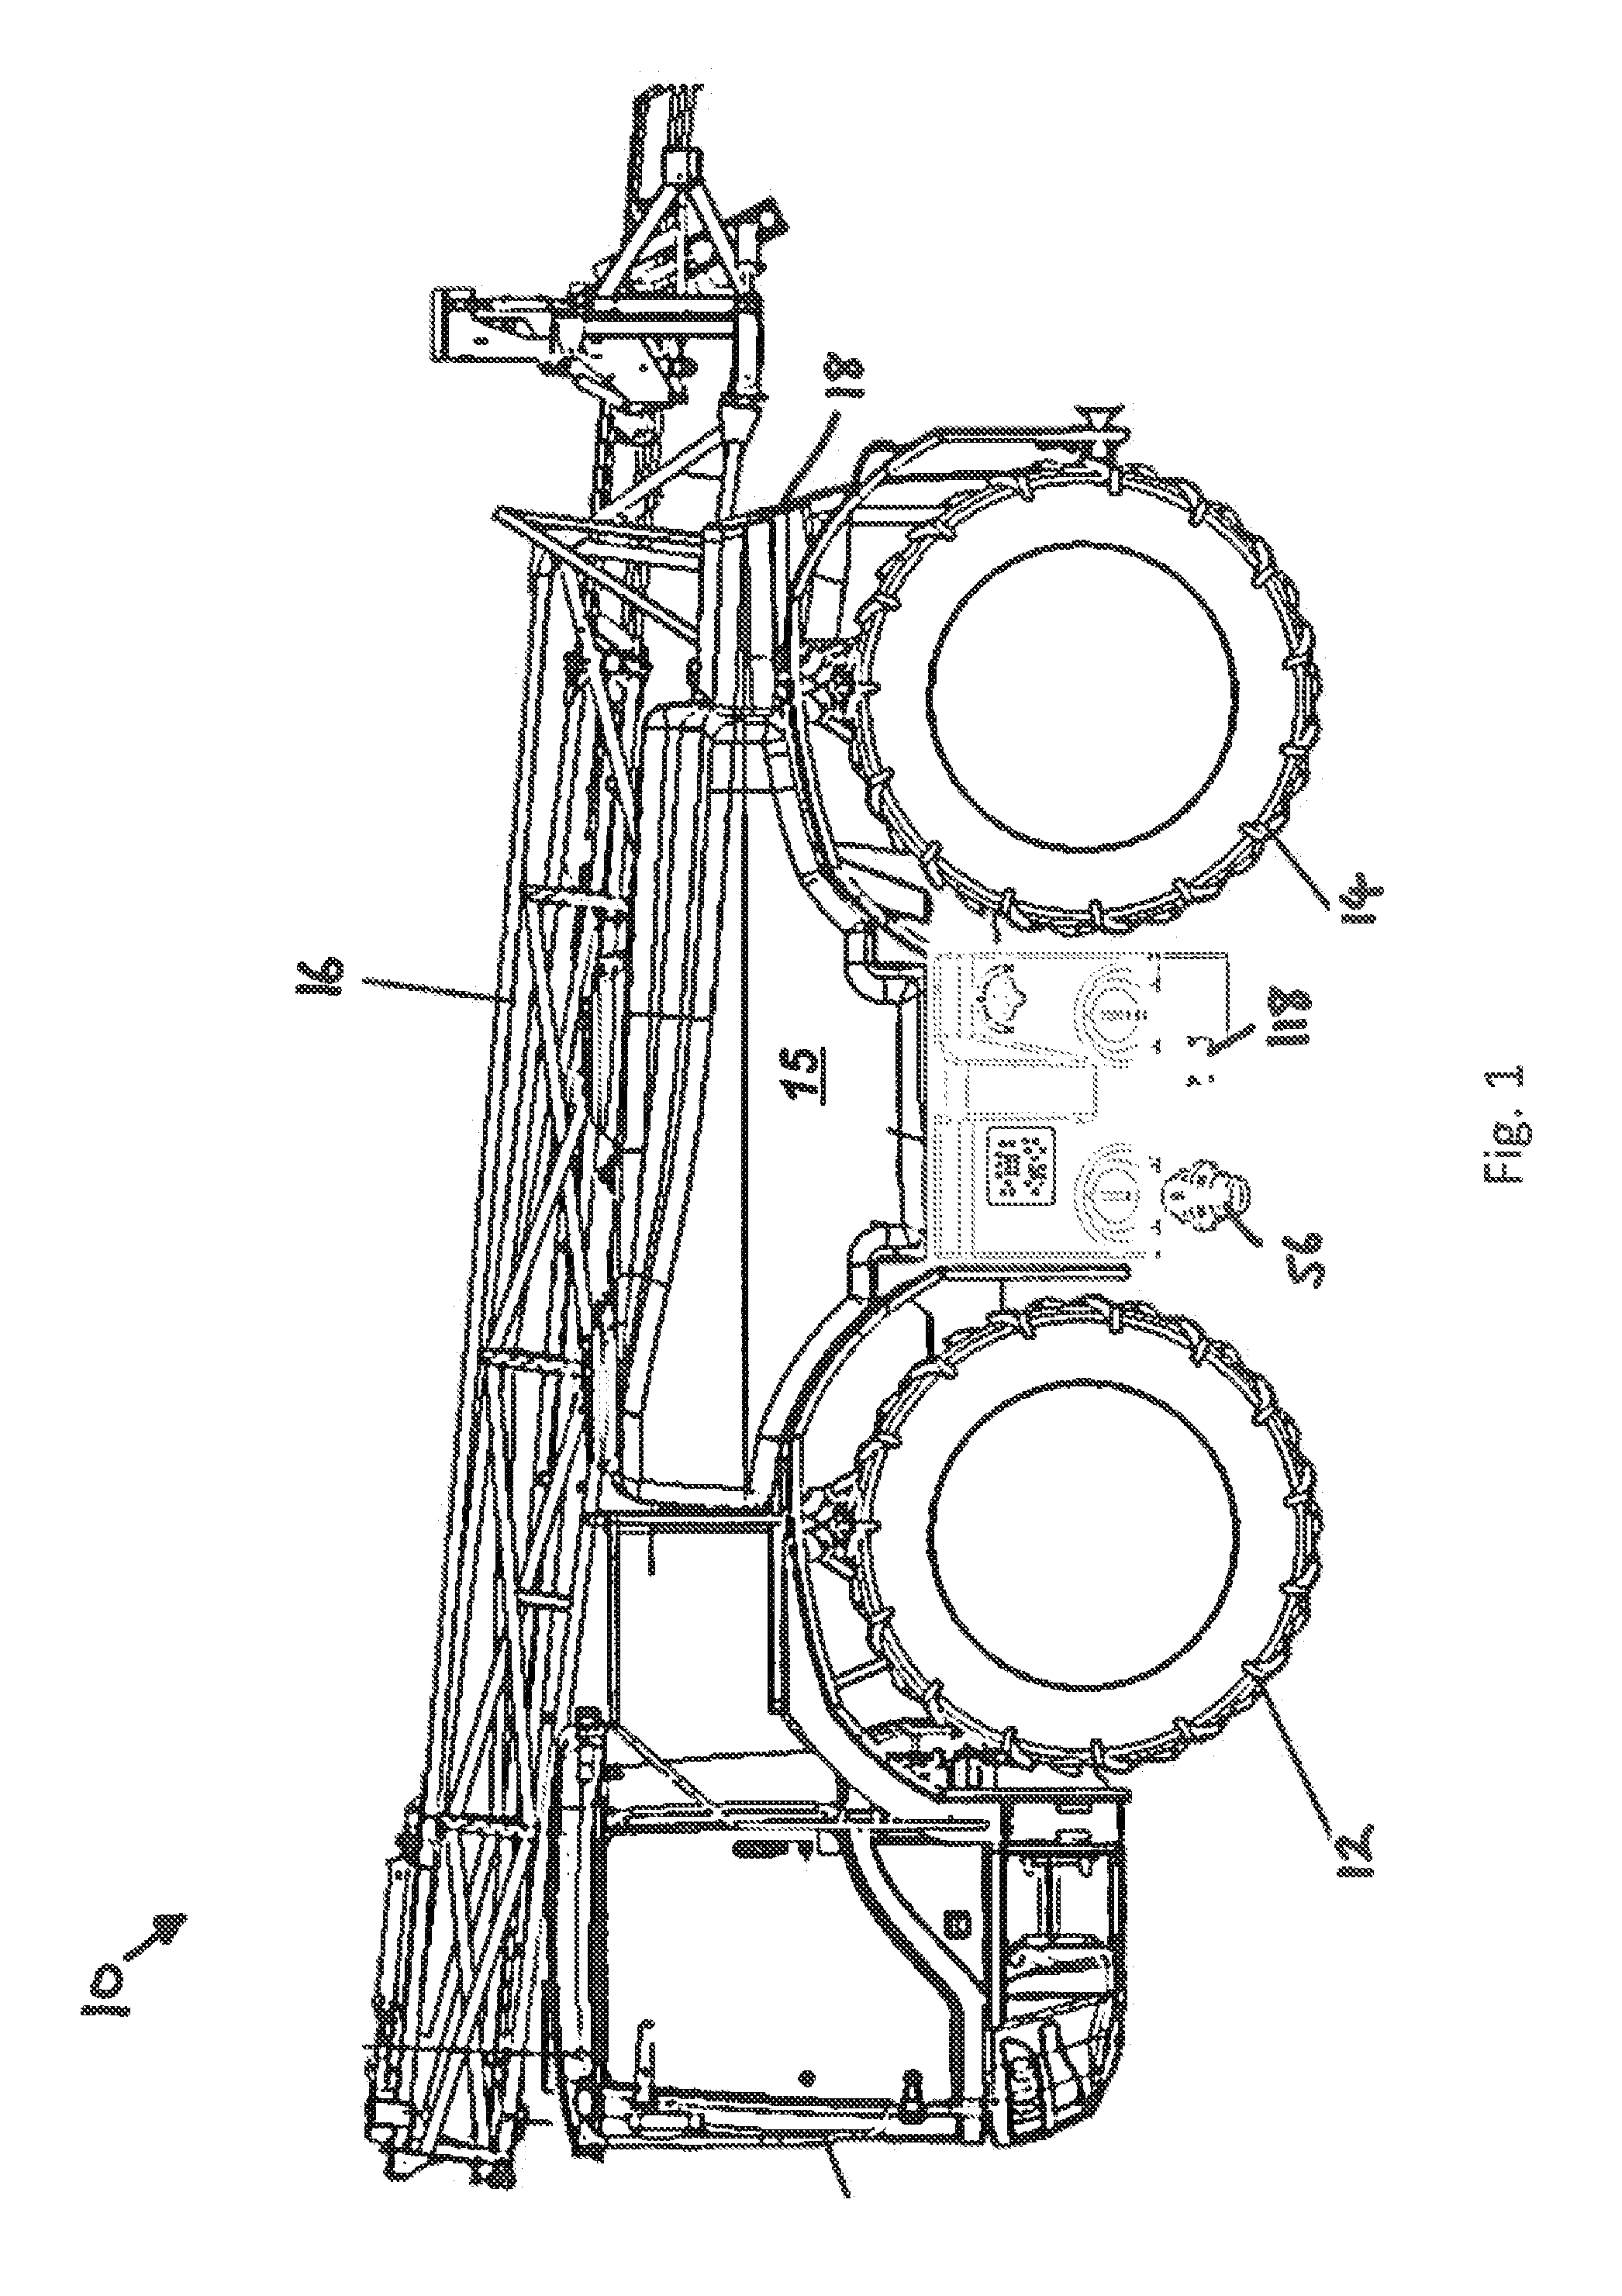 Pump system and agricultural sprayer pump system